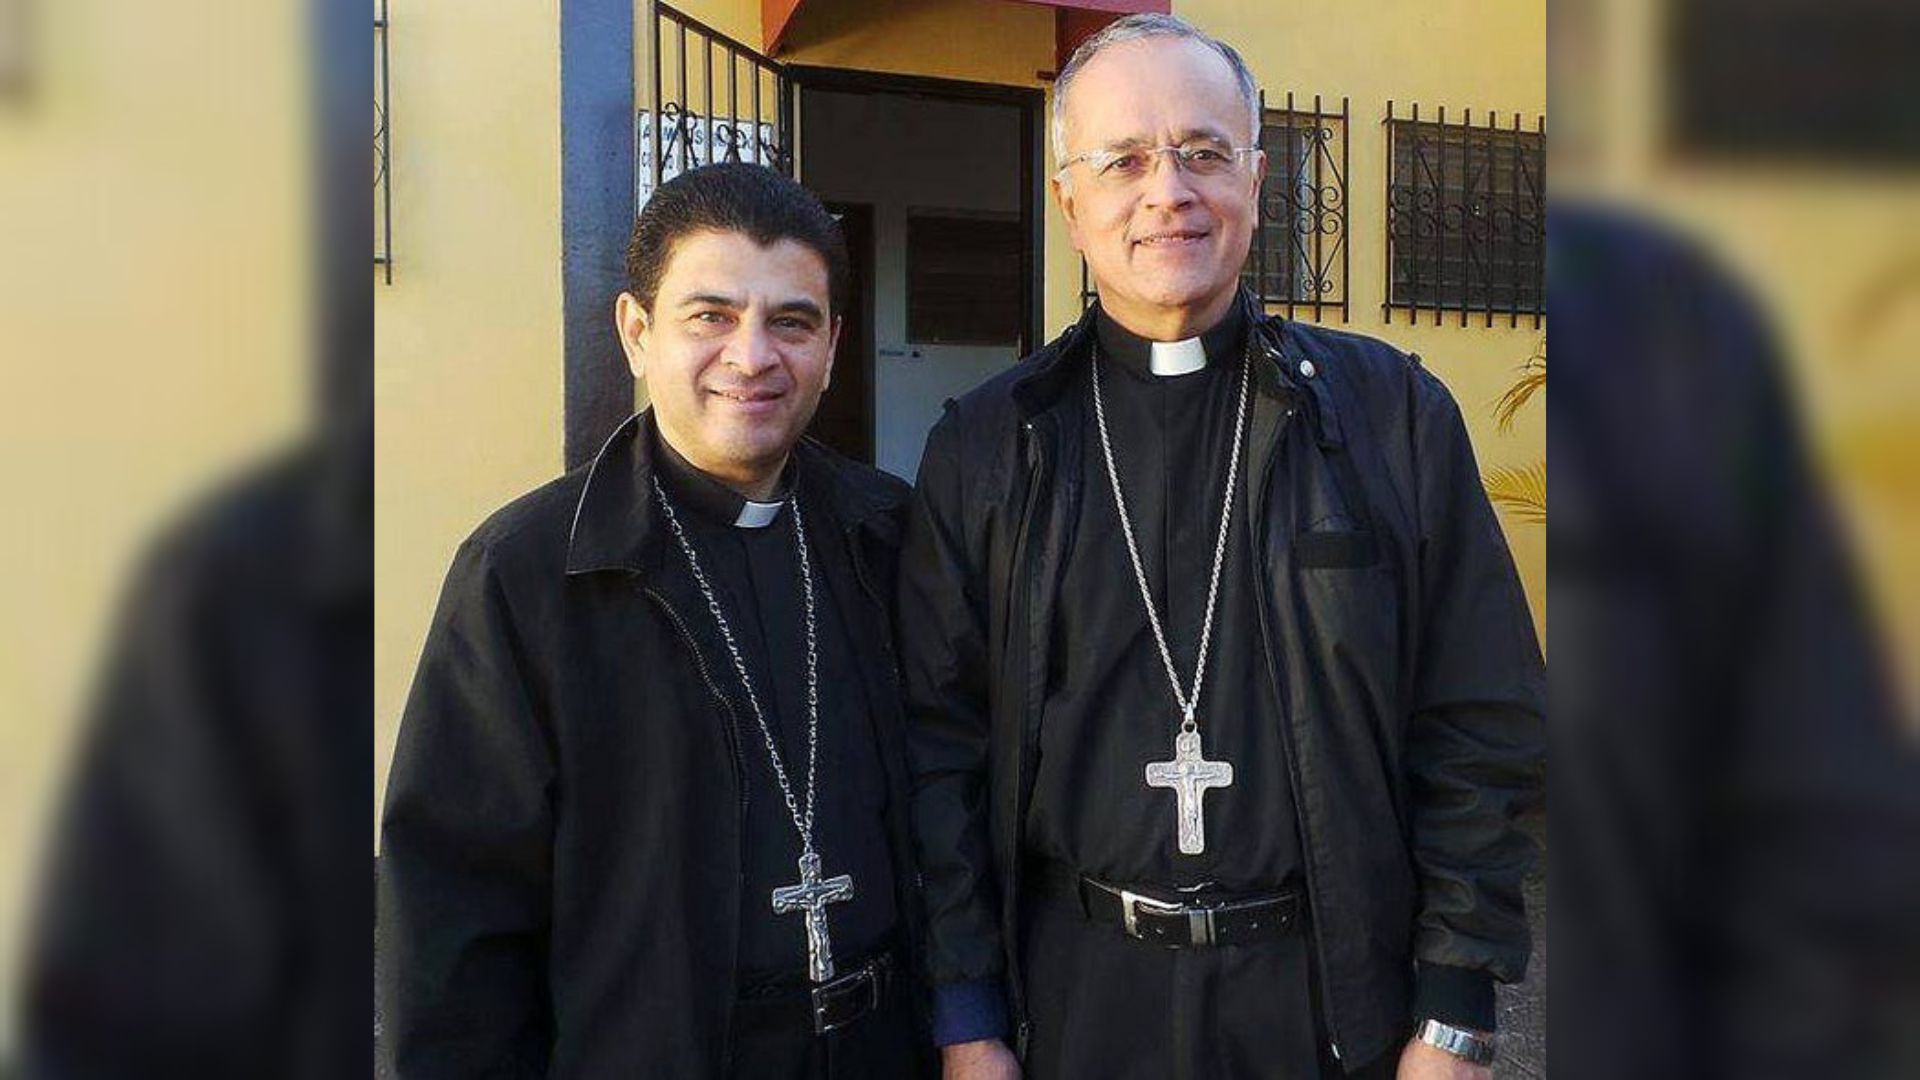 Monsignor Báez: "We must ask for freedom, not negotiate with people, because they are innocent"